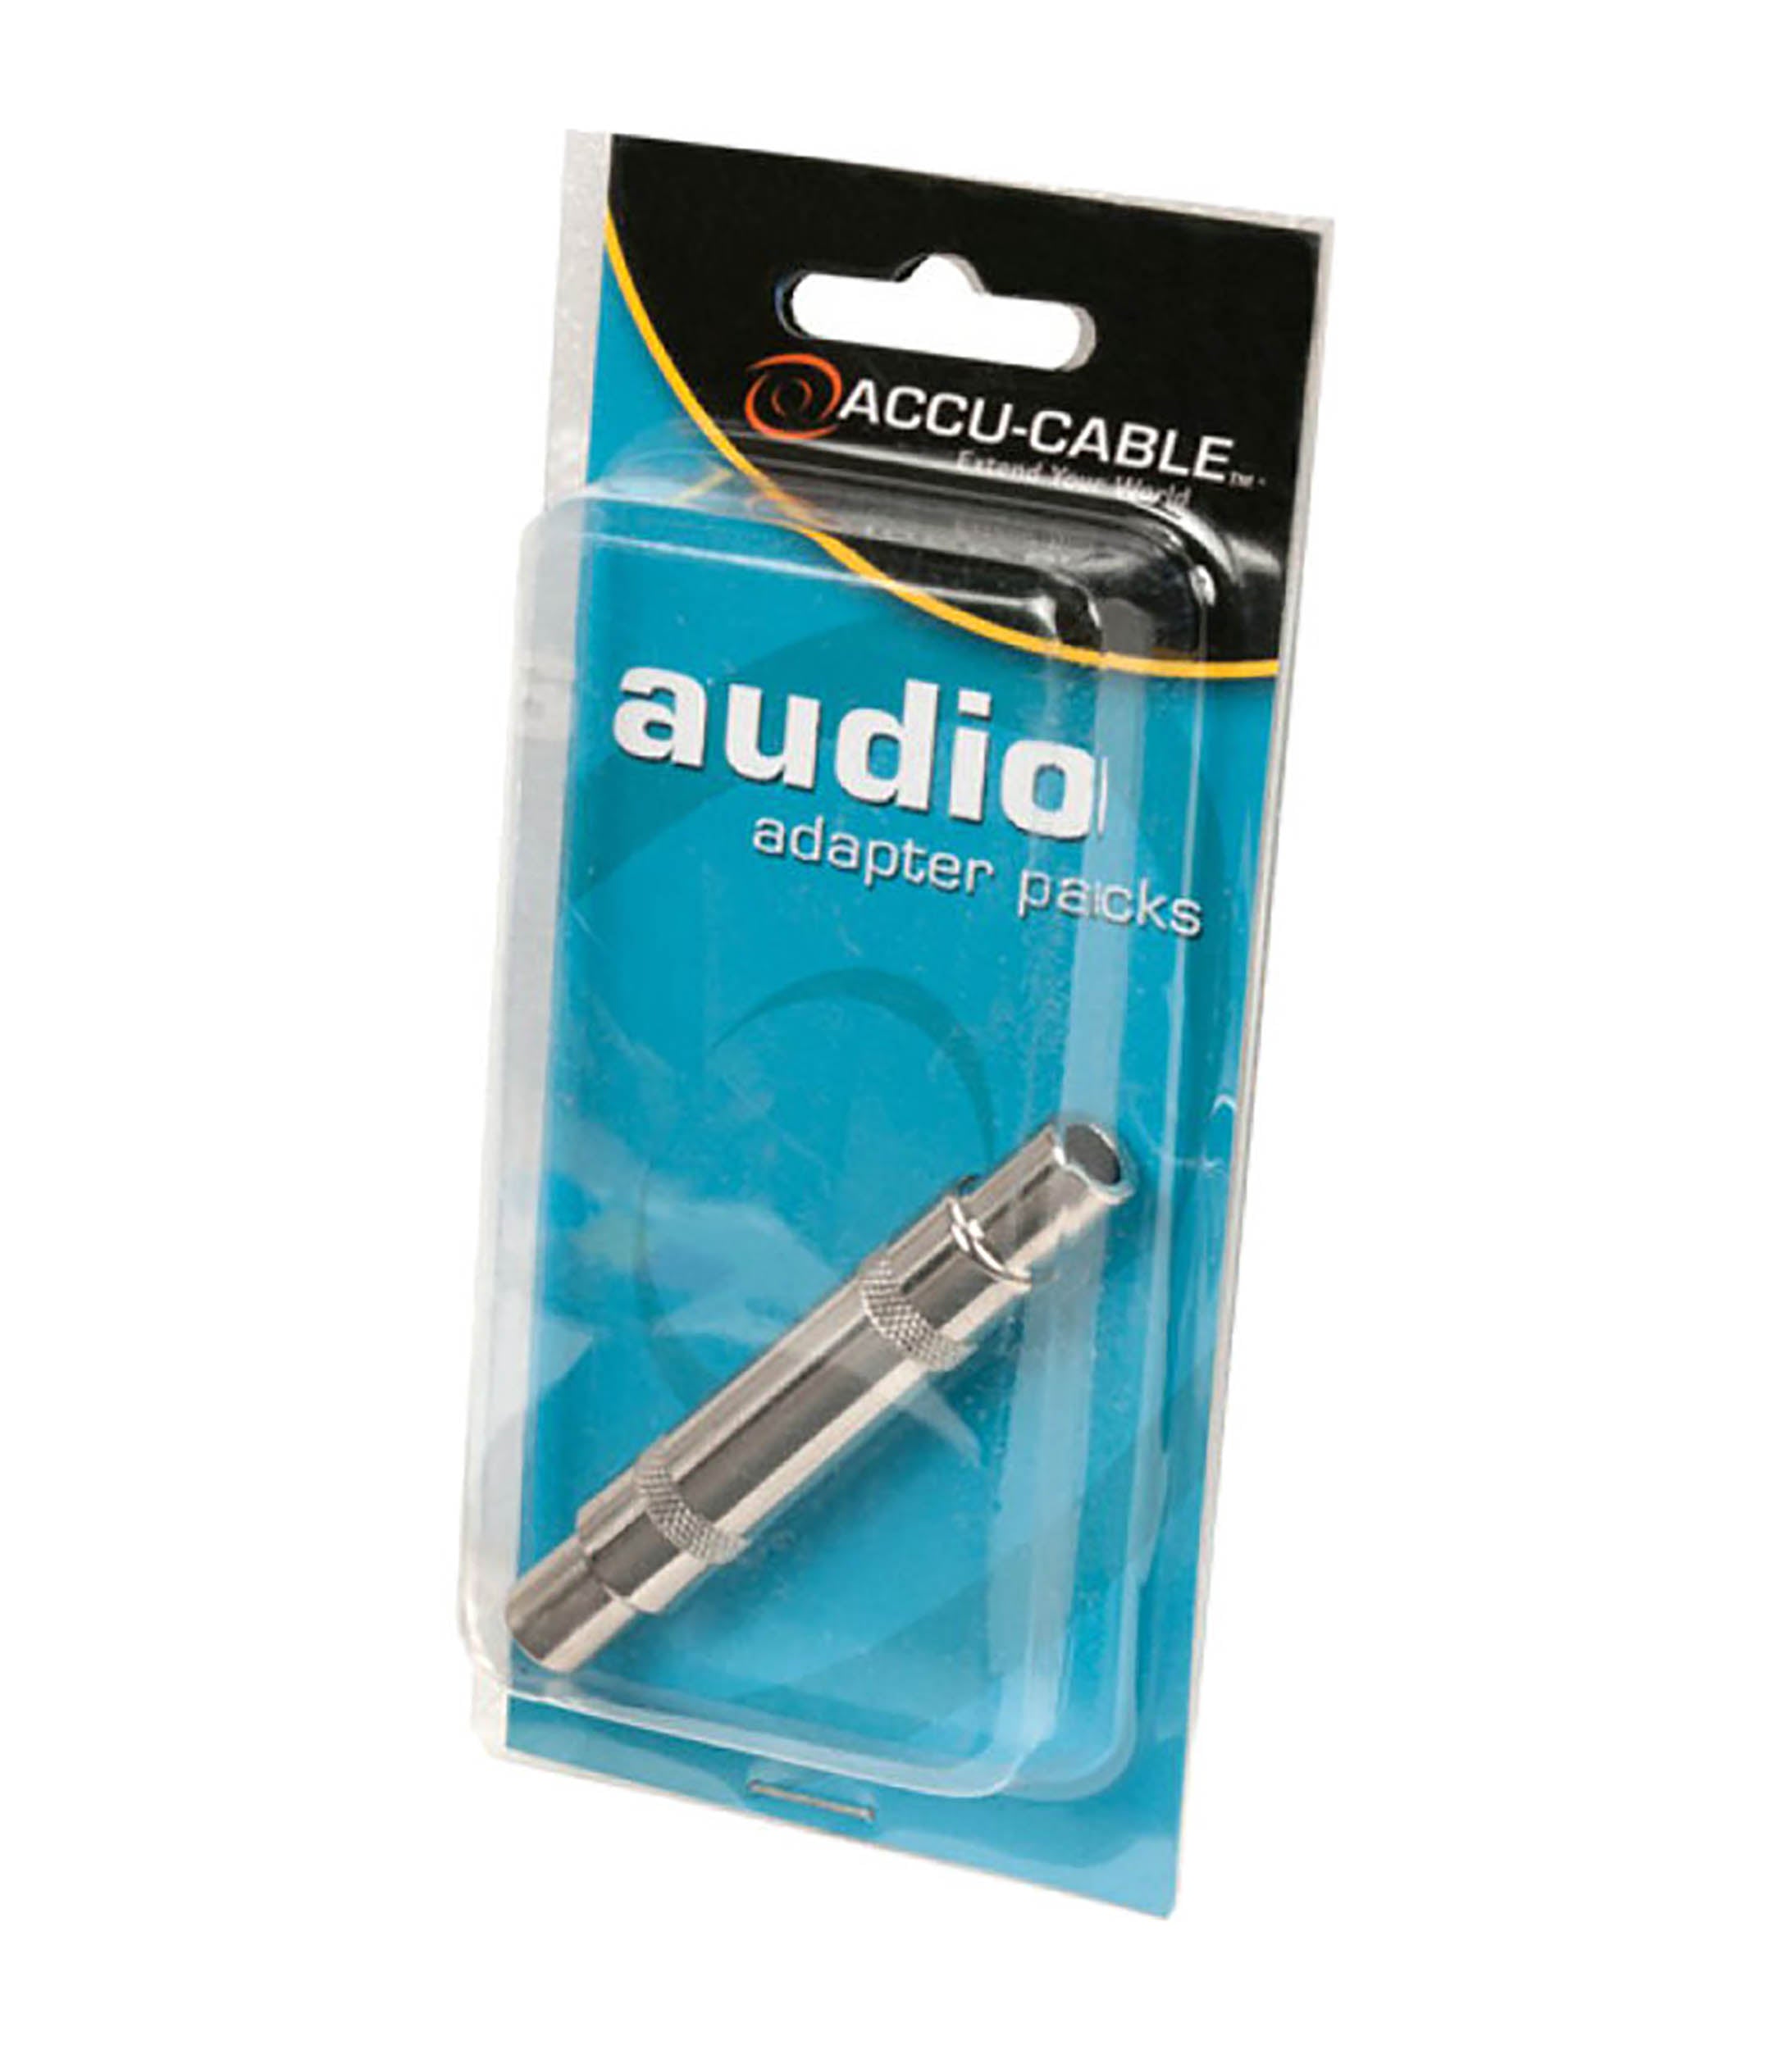 Accu-Cable ACQFQF, 1/4" Female to 1/4" Female Adapter by Accu Cable